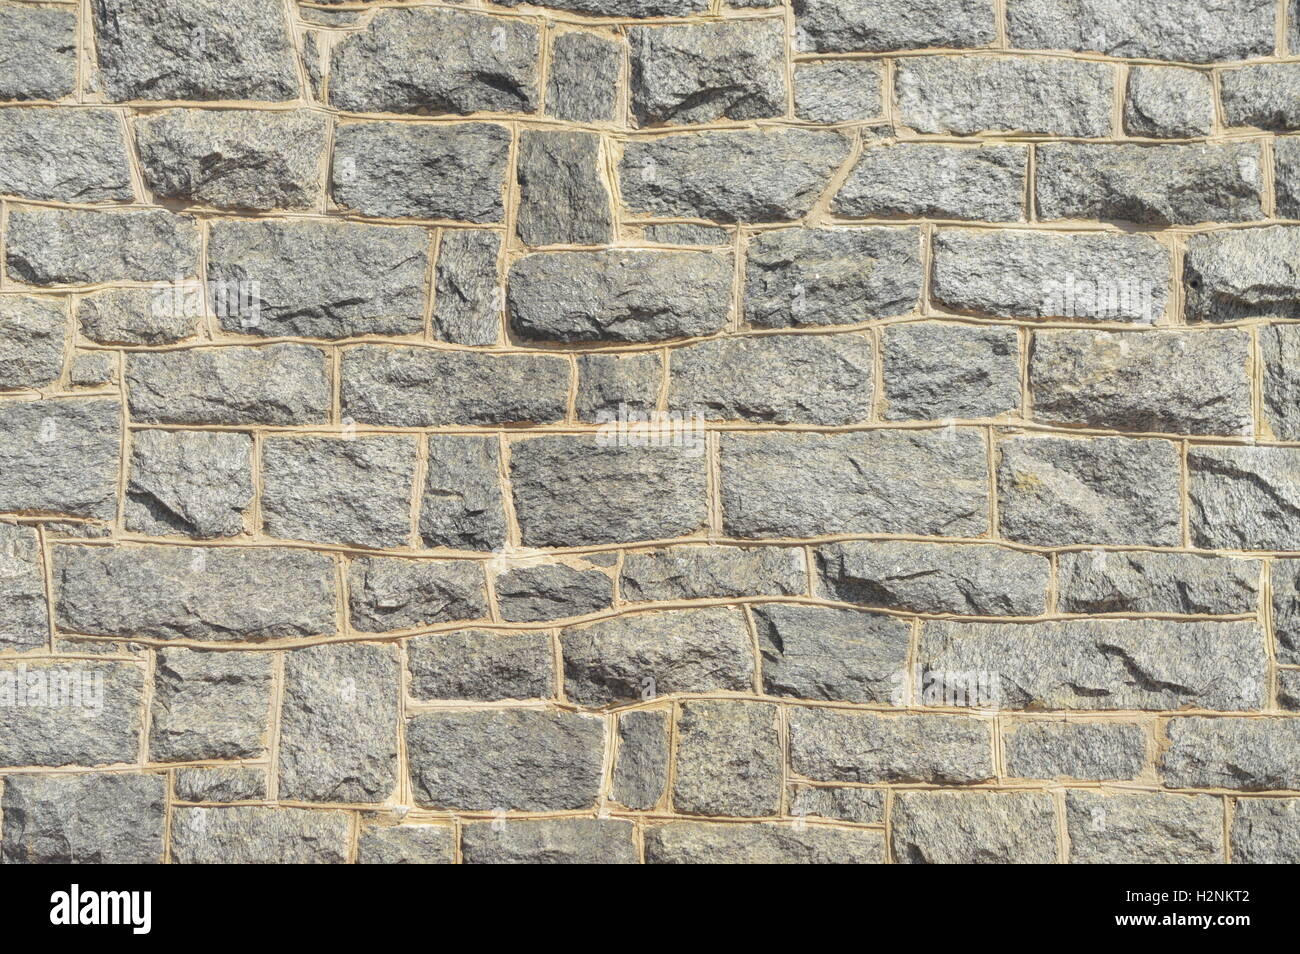 A blue stone wall in Chesapeake City, Cecil County, Maryland, USA Stock Photo